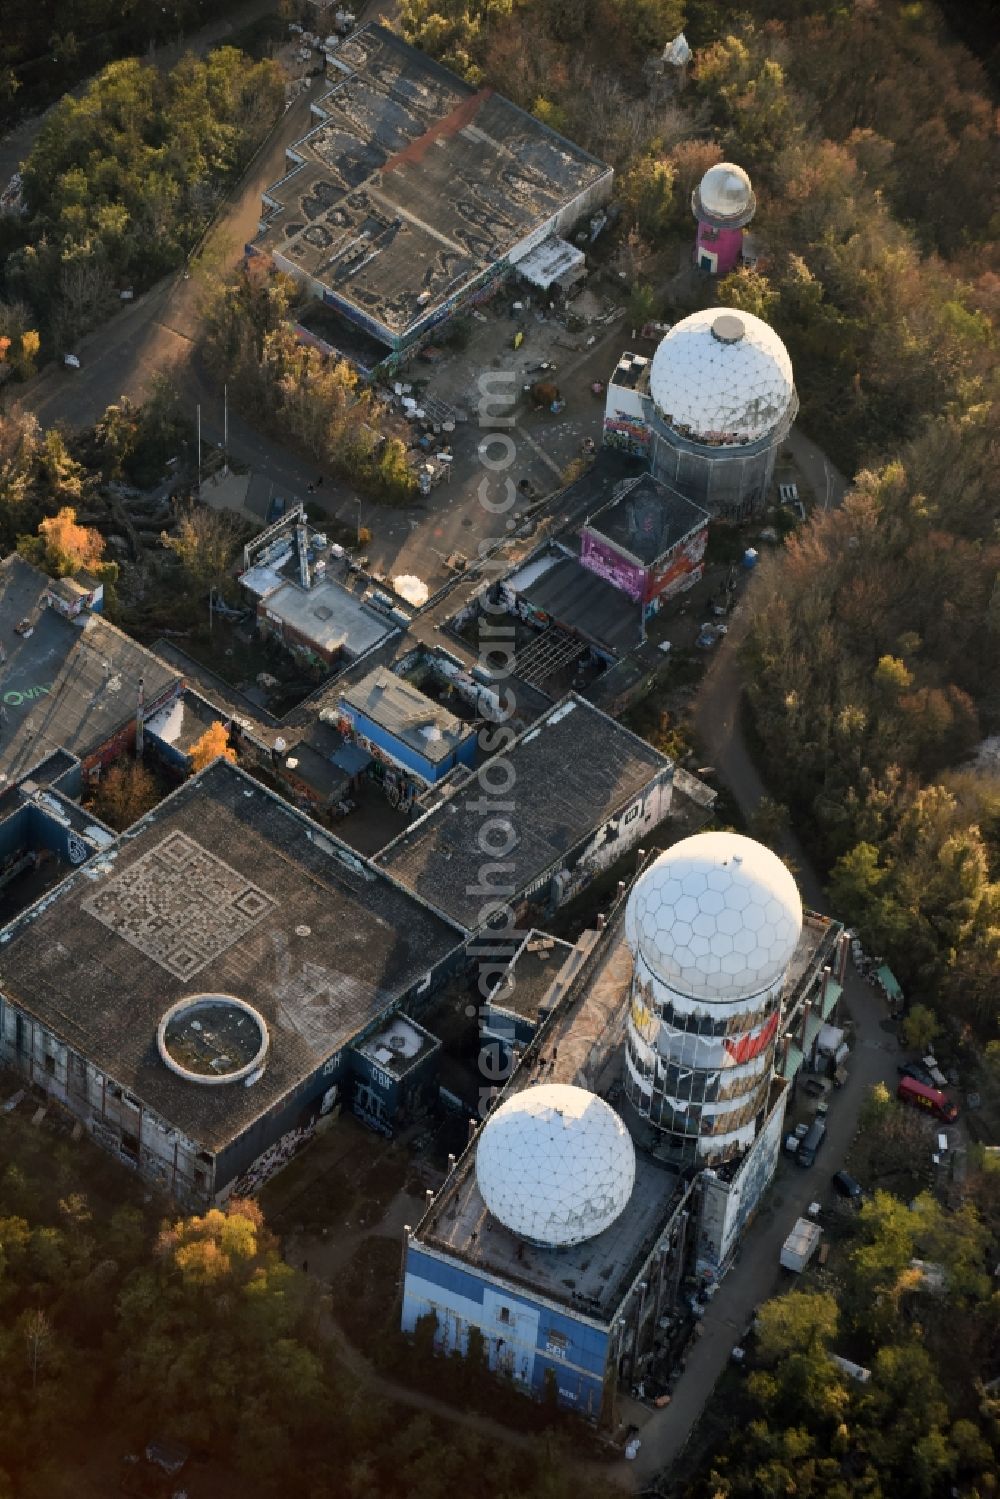 Aerial image Berlin - Ruins of the former American military interception and radar system on the Teufelsberg in Berlin - Charlottenburg